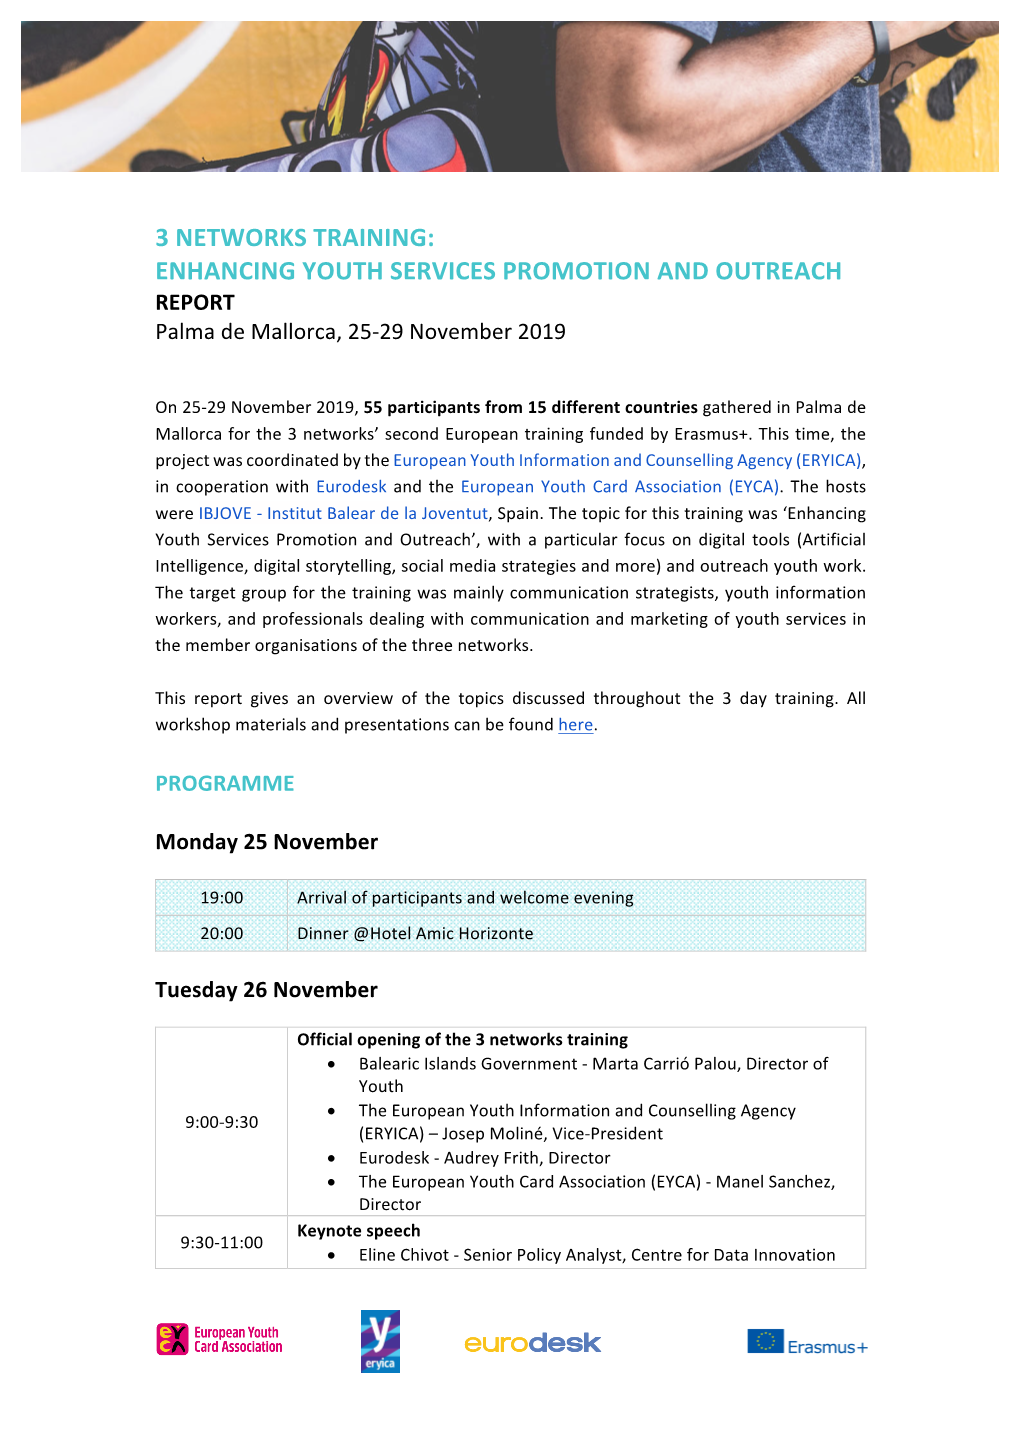 3 NETWORKS TRAINING: ENHANCING YOUTH SERVICES PROMOTION and OUTREACH REPORT Palma De Mallorca, 25-29 November 2019